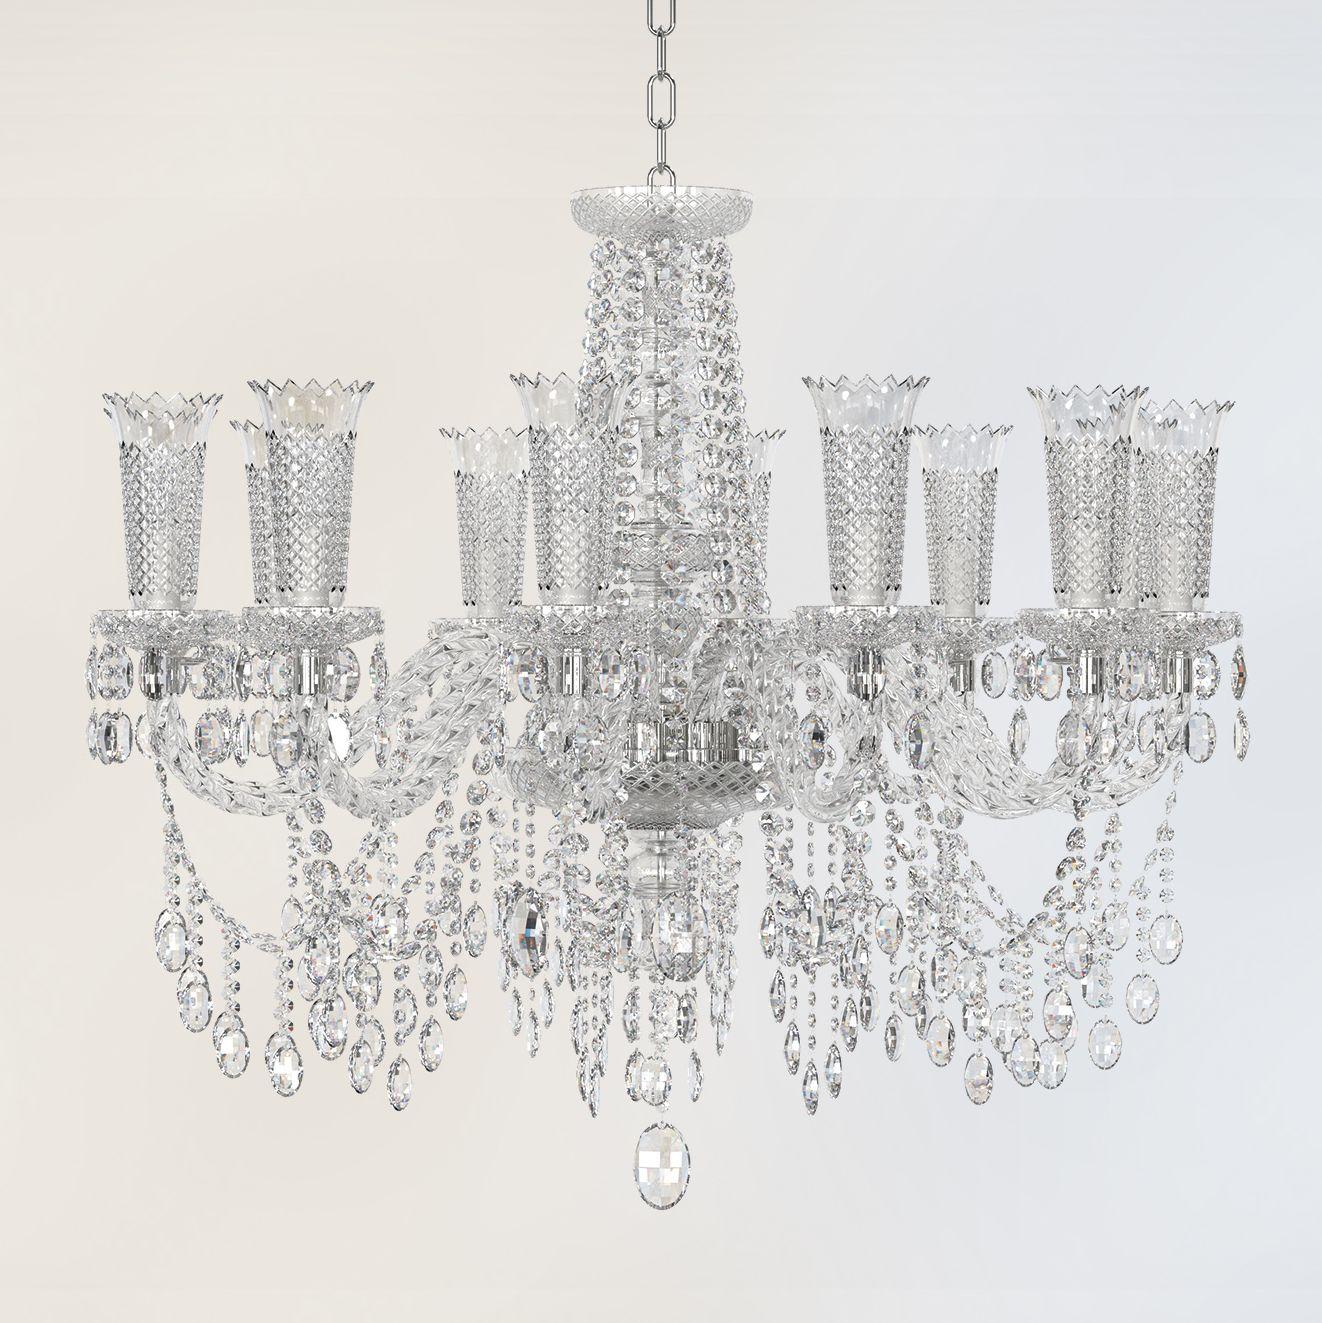 Czech Eterno Classical Bohemian Crystal Chandelier For Sale